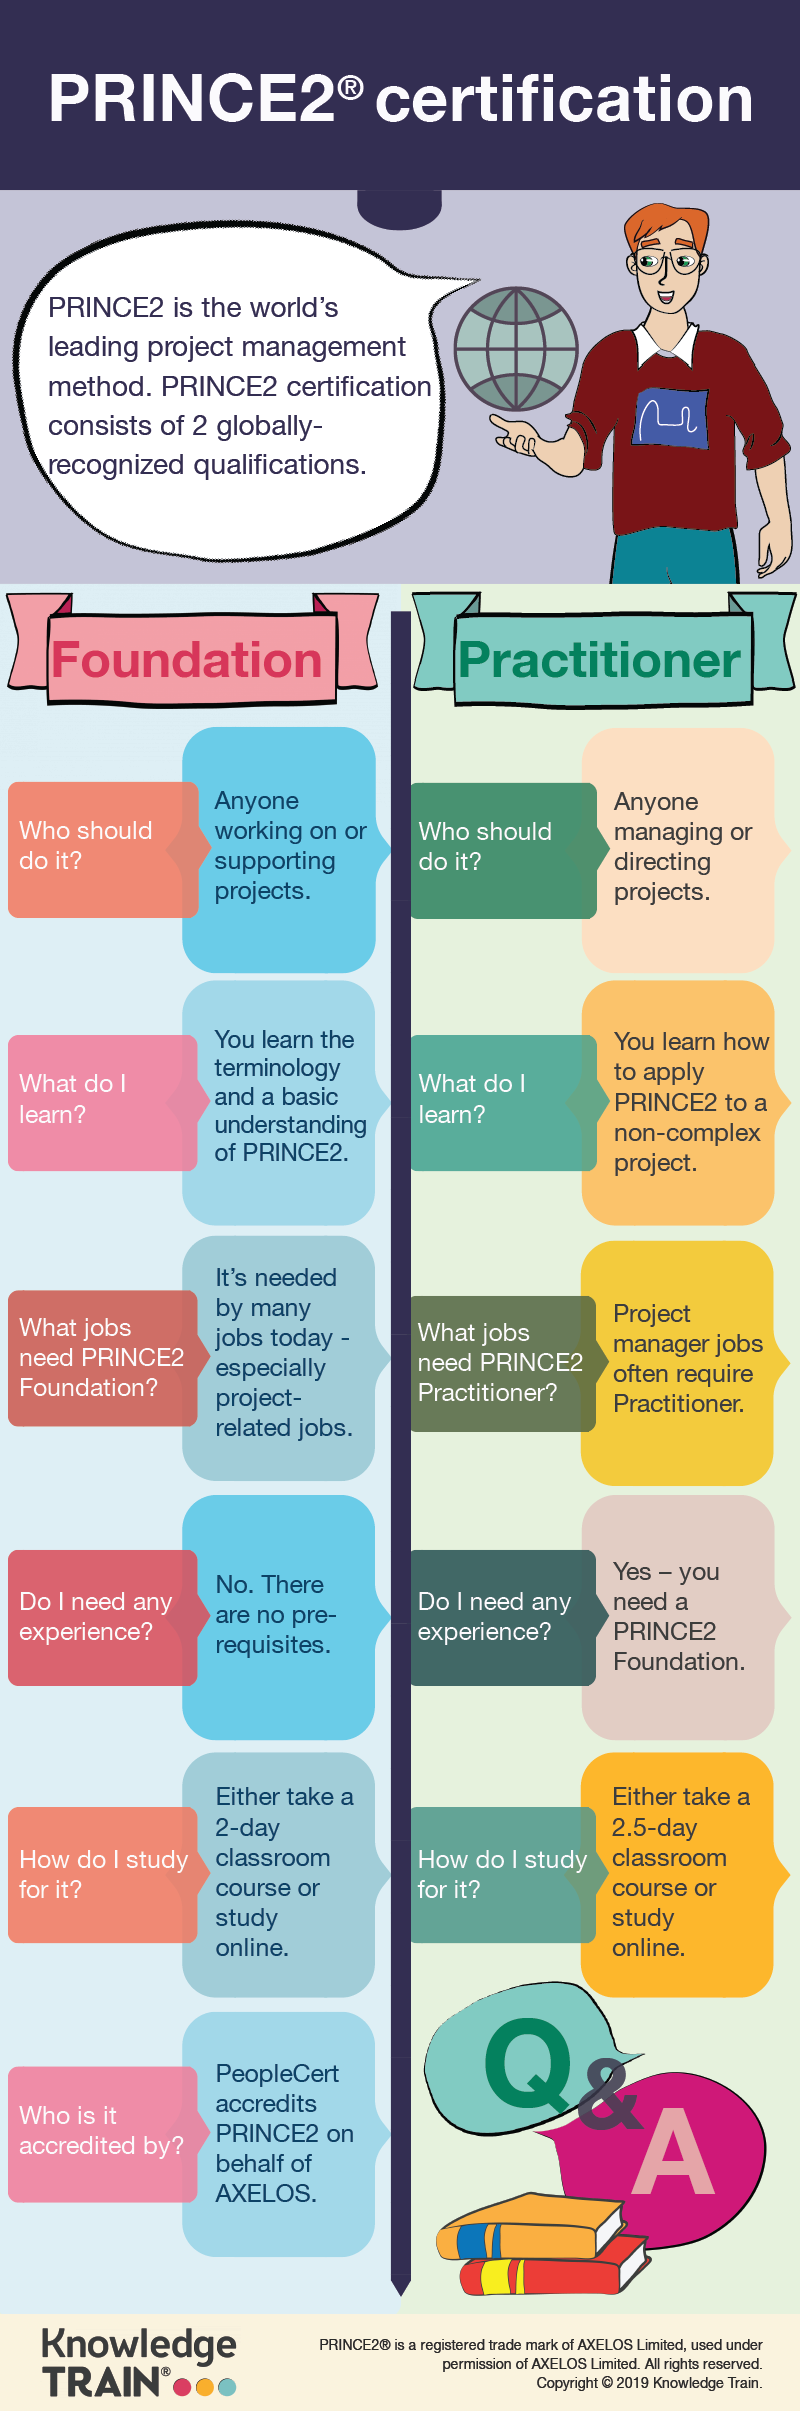 Infographic showing some FAQs about PRINCE 2 certification.